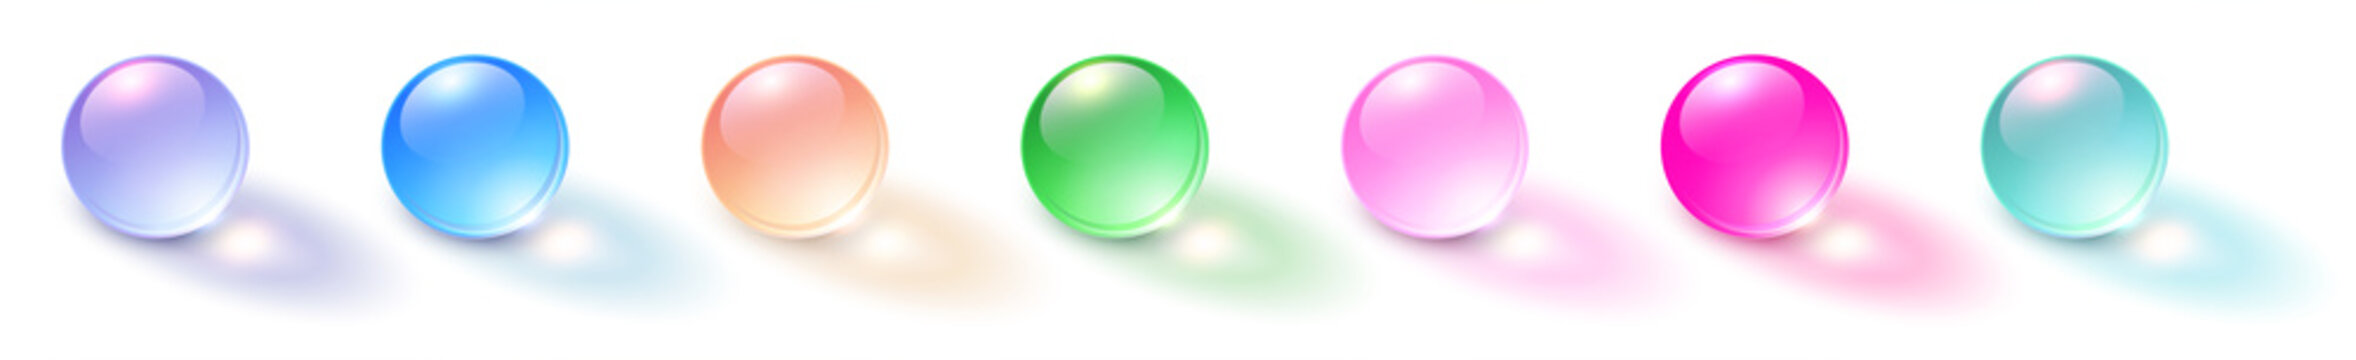 Set of colored spheres, shiny and glossy 3D colorful glass balls collection, multicolored vector illustration.